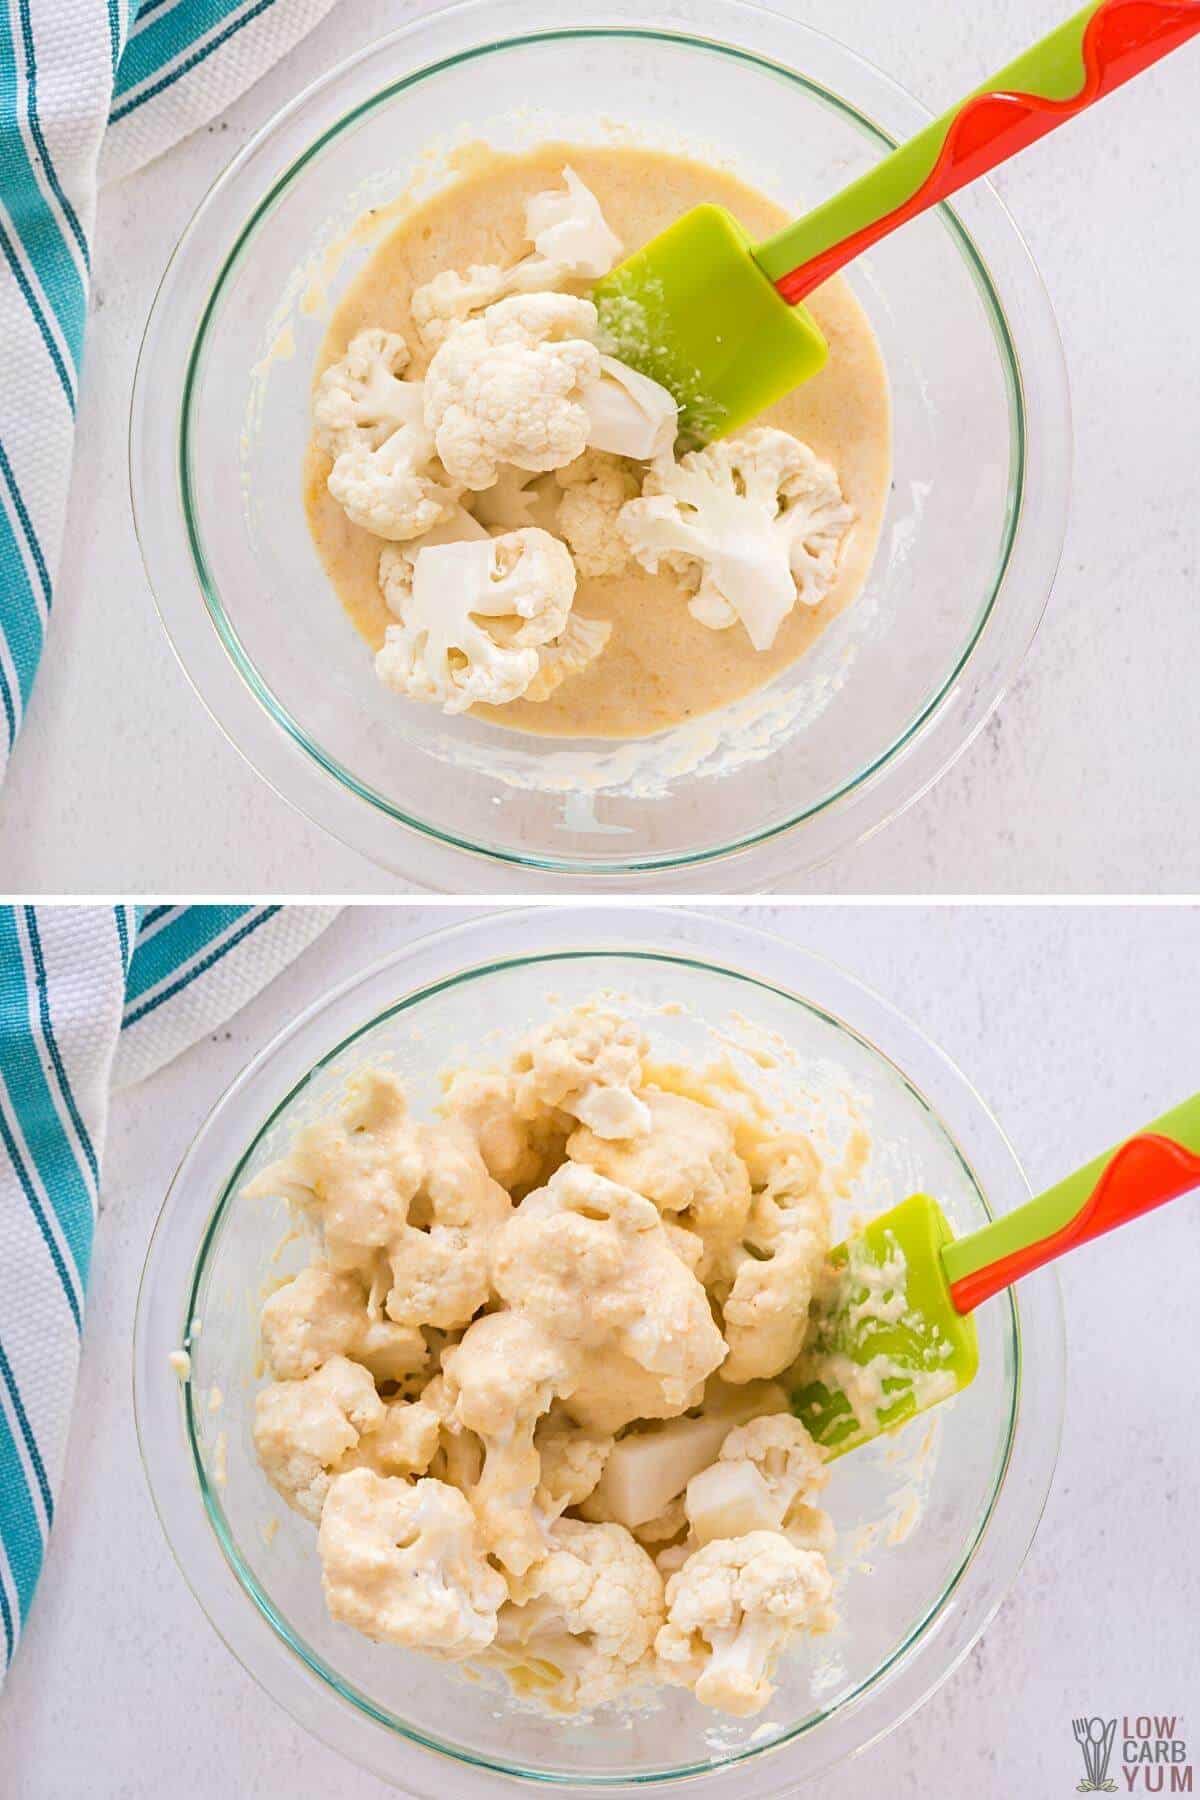 coating cauliflower in low-carb bread batter